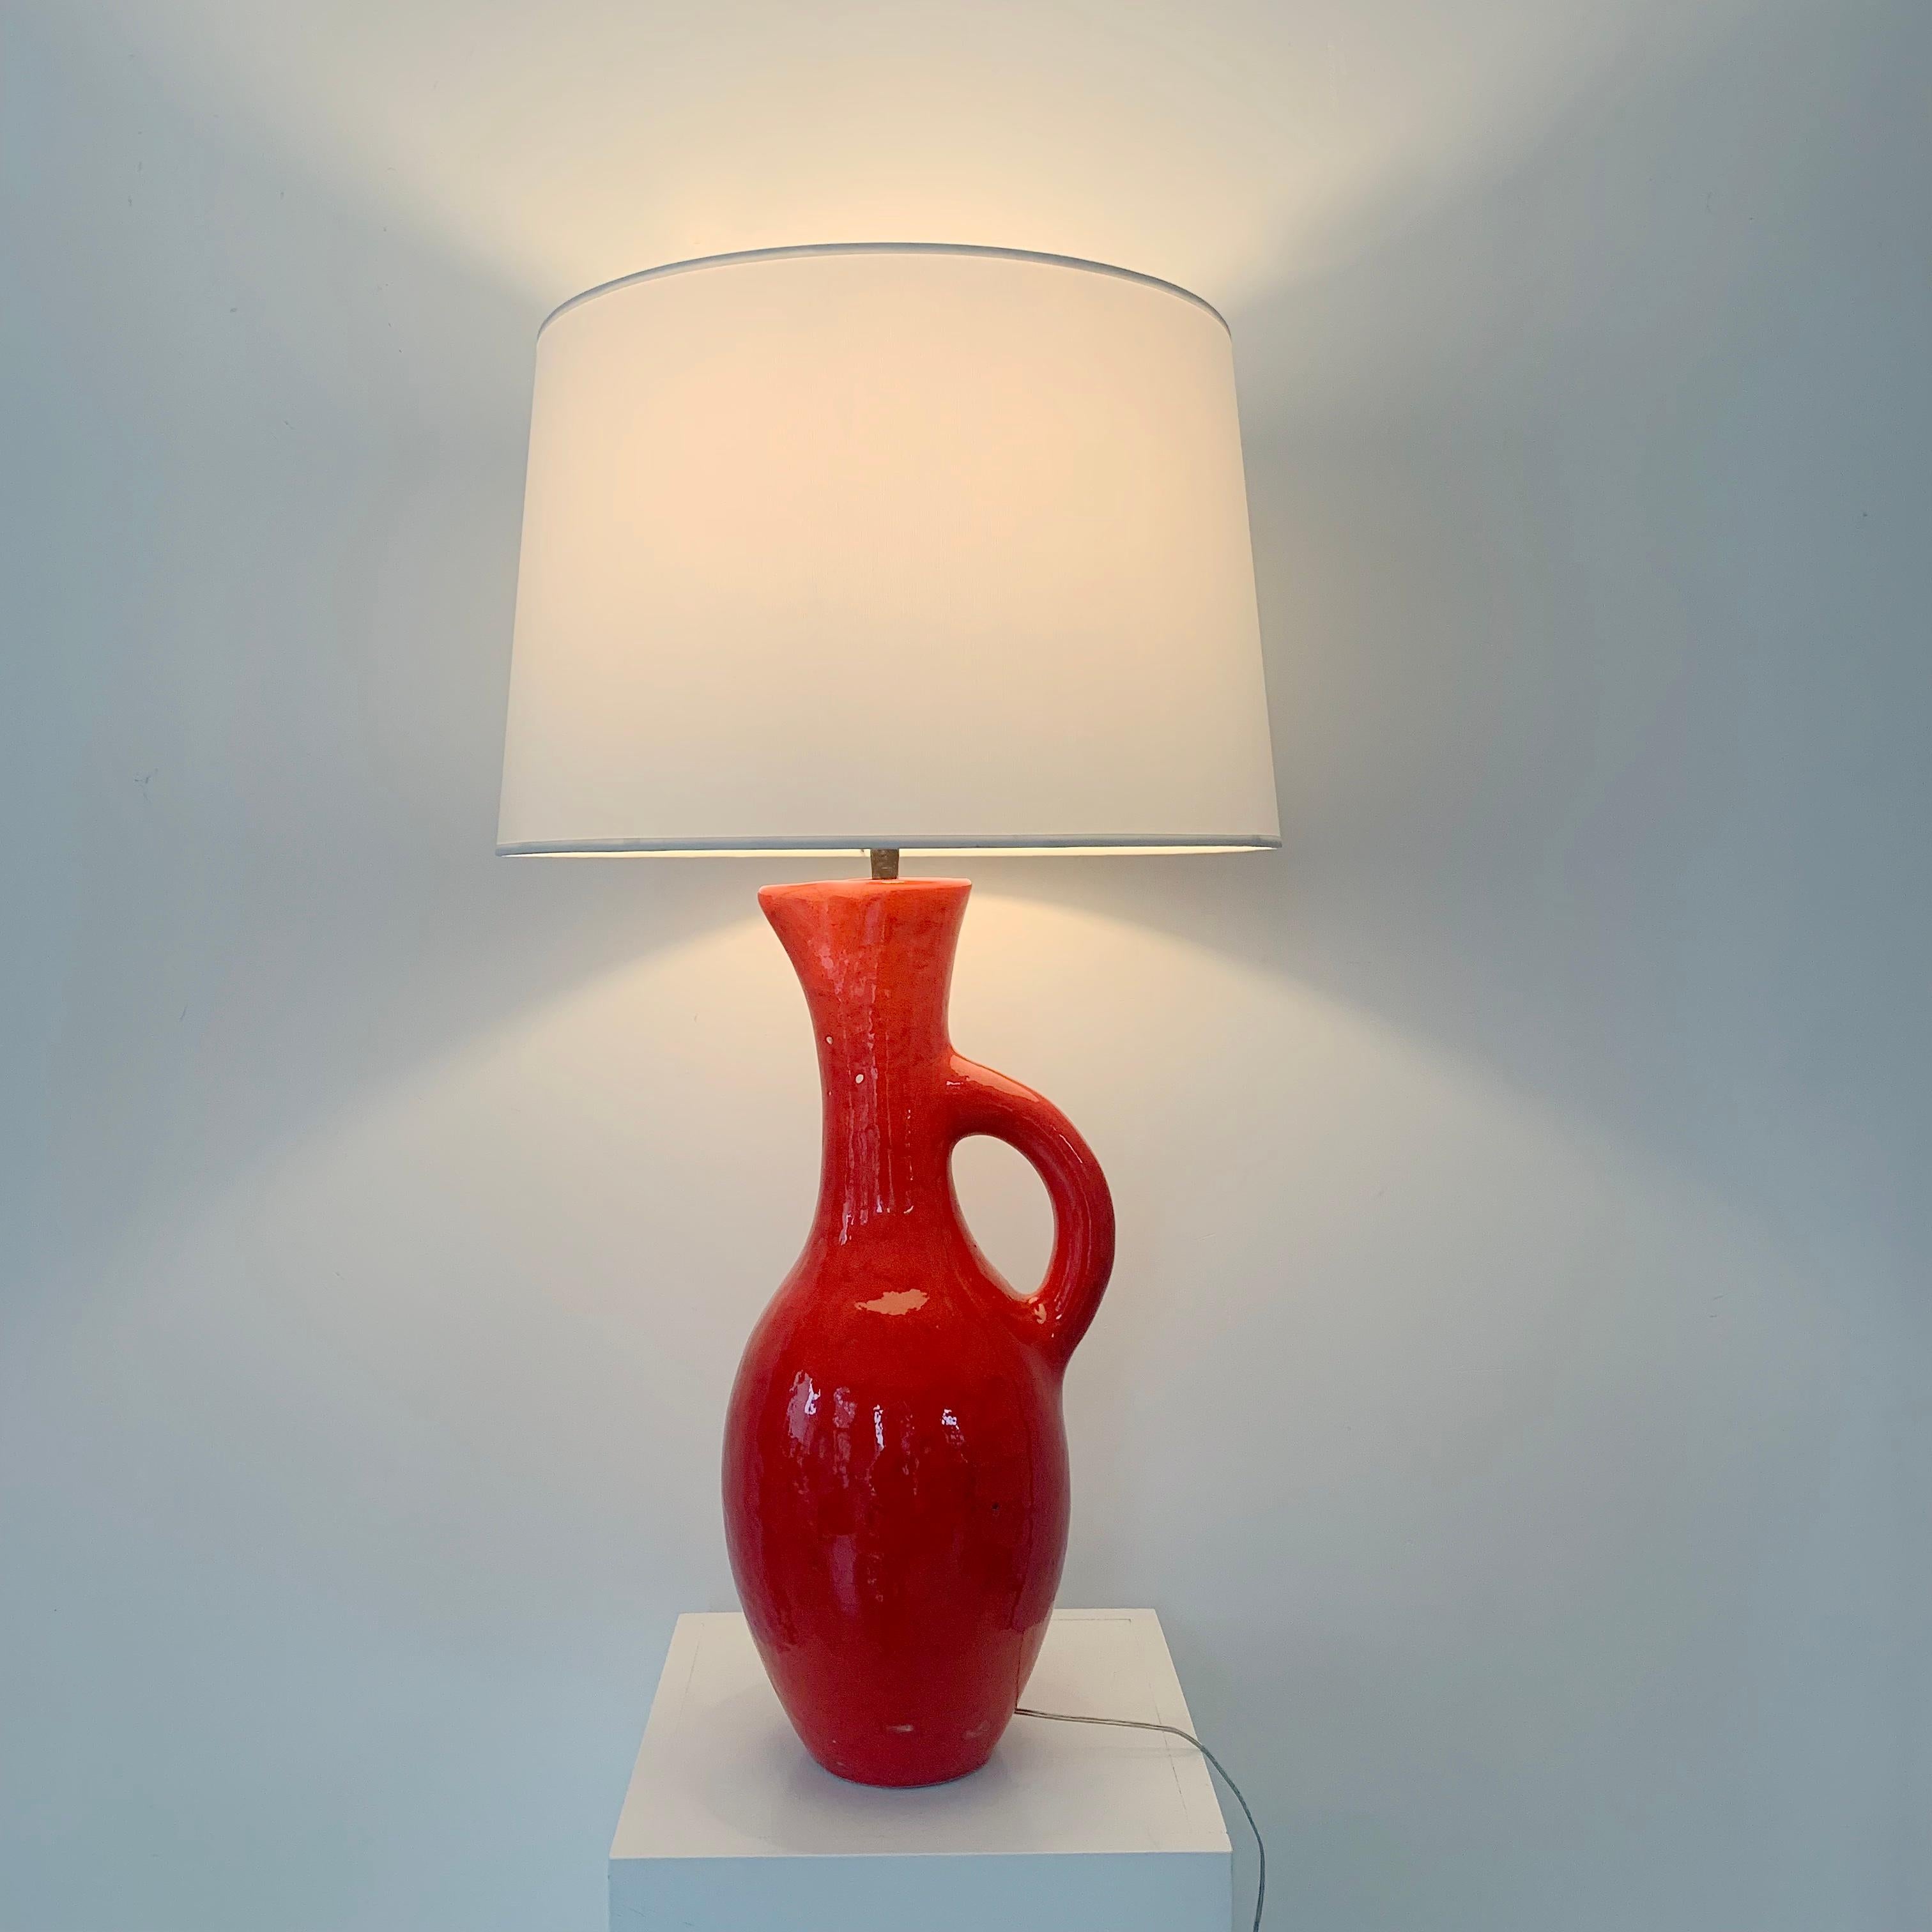 Les Archanges/Gilbert Valentin Large Signed Table Lamp, 1950s, Vallauris. 1